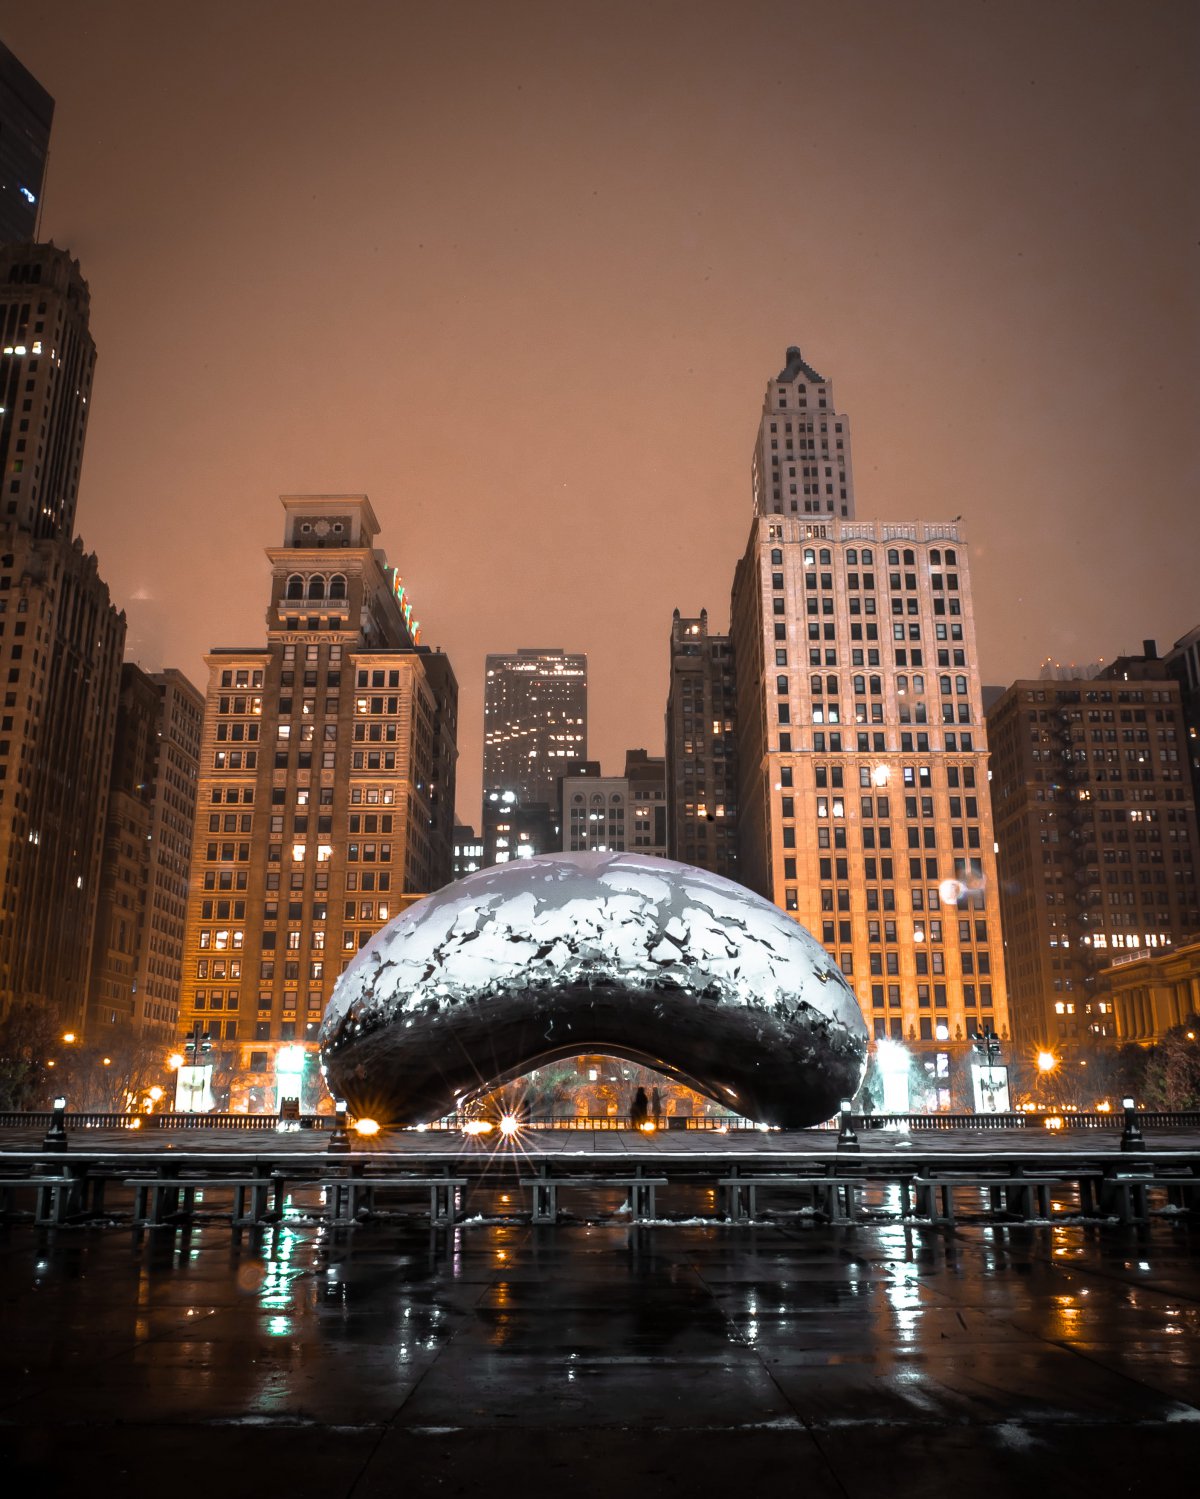 Cloud Gate architectural scenery picture in Chicago, USA